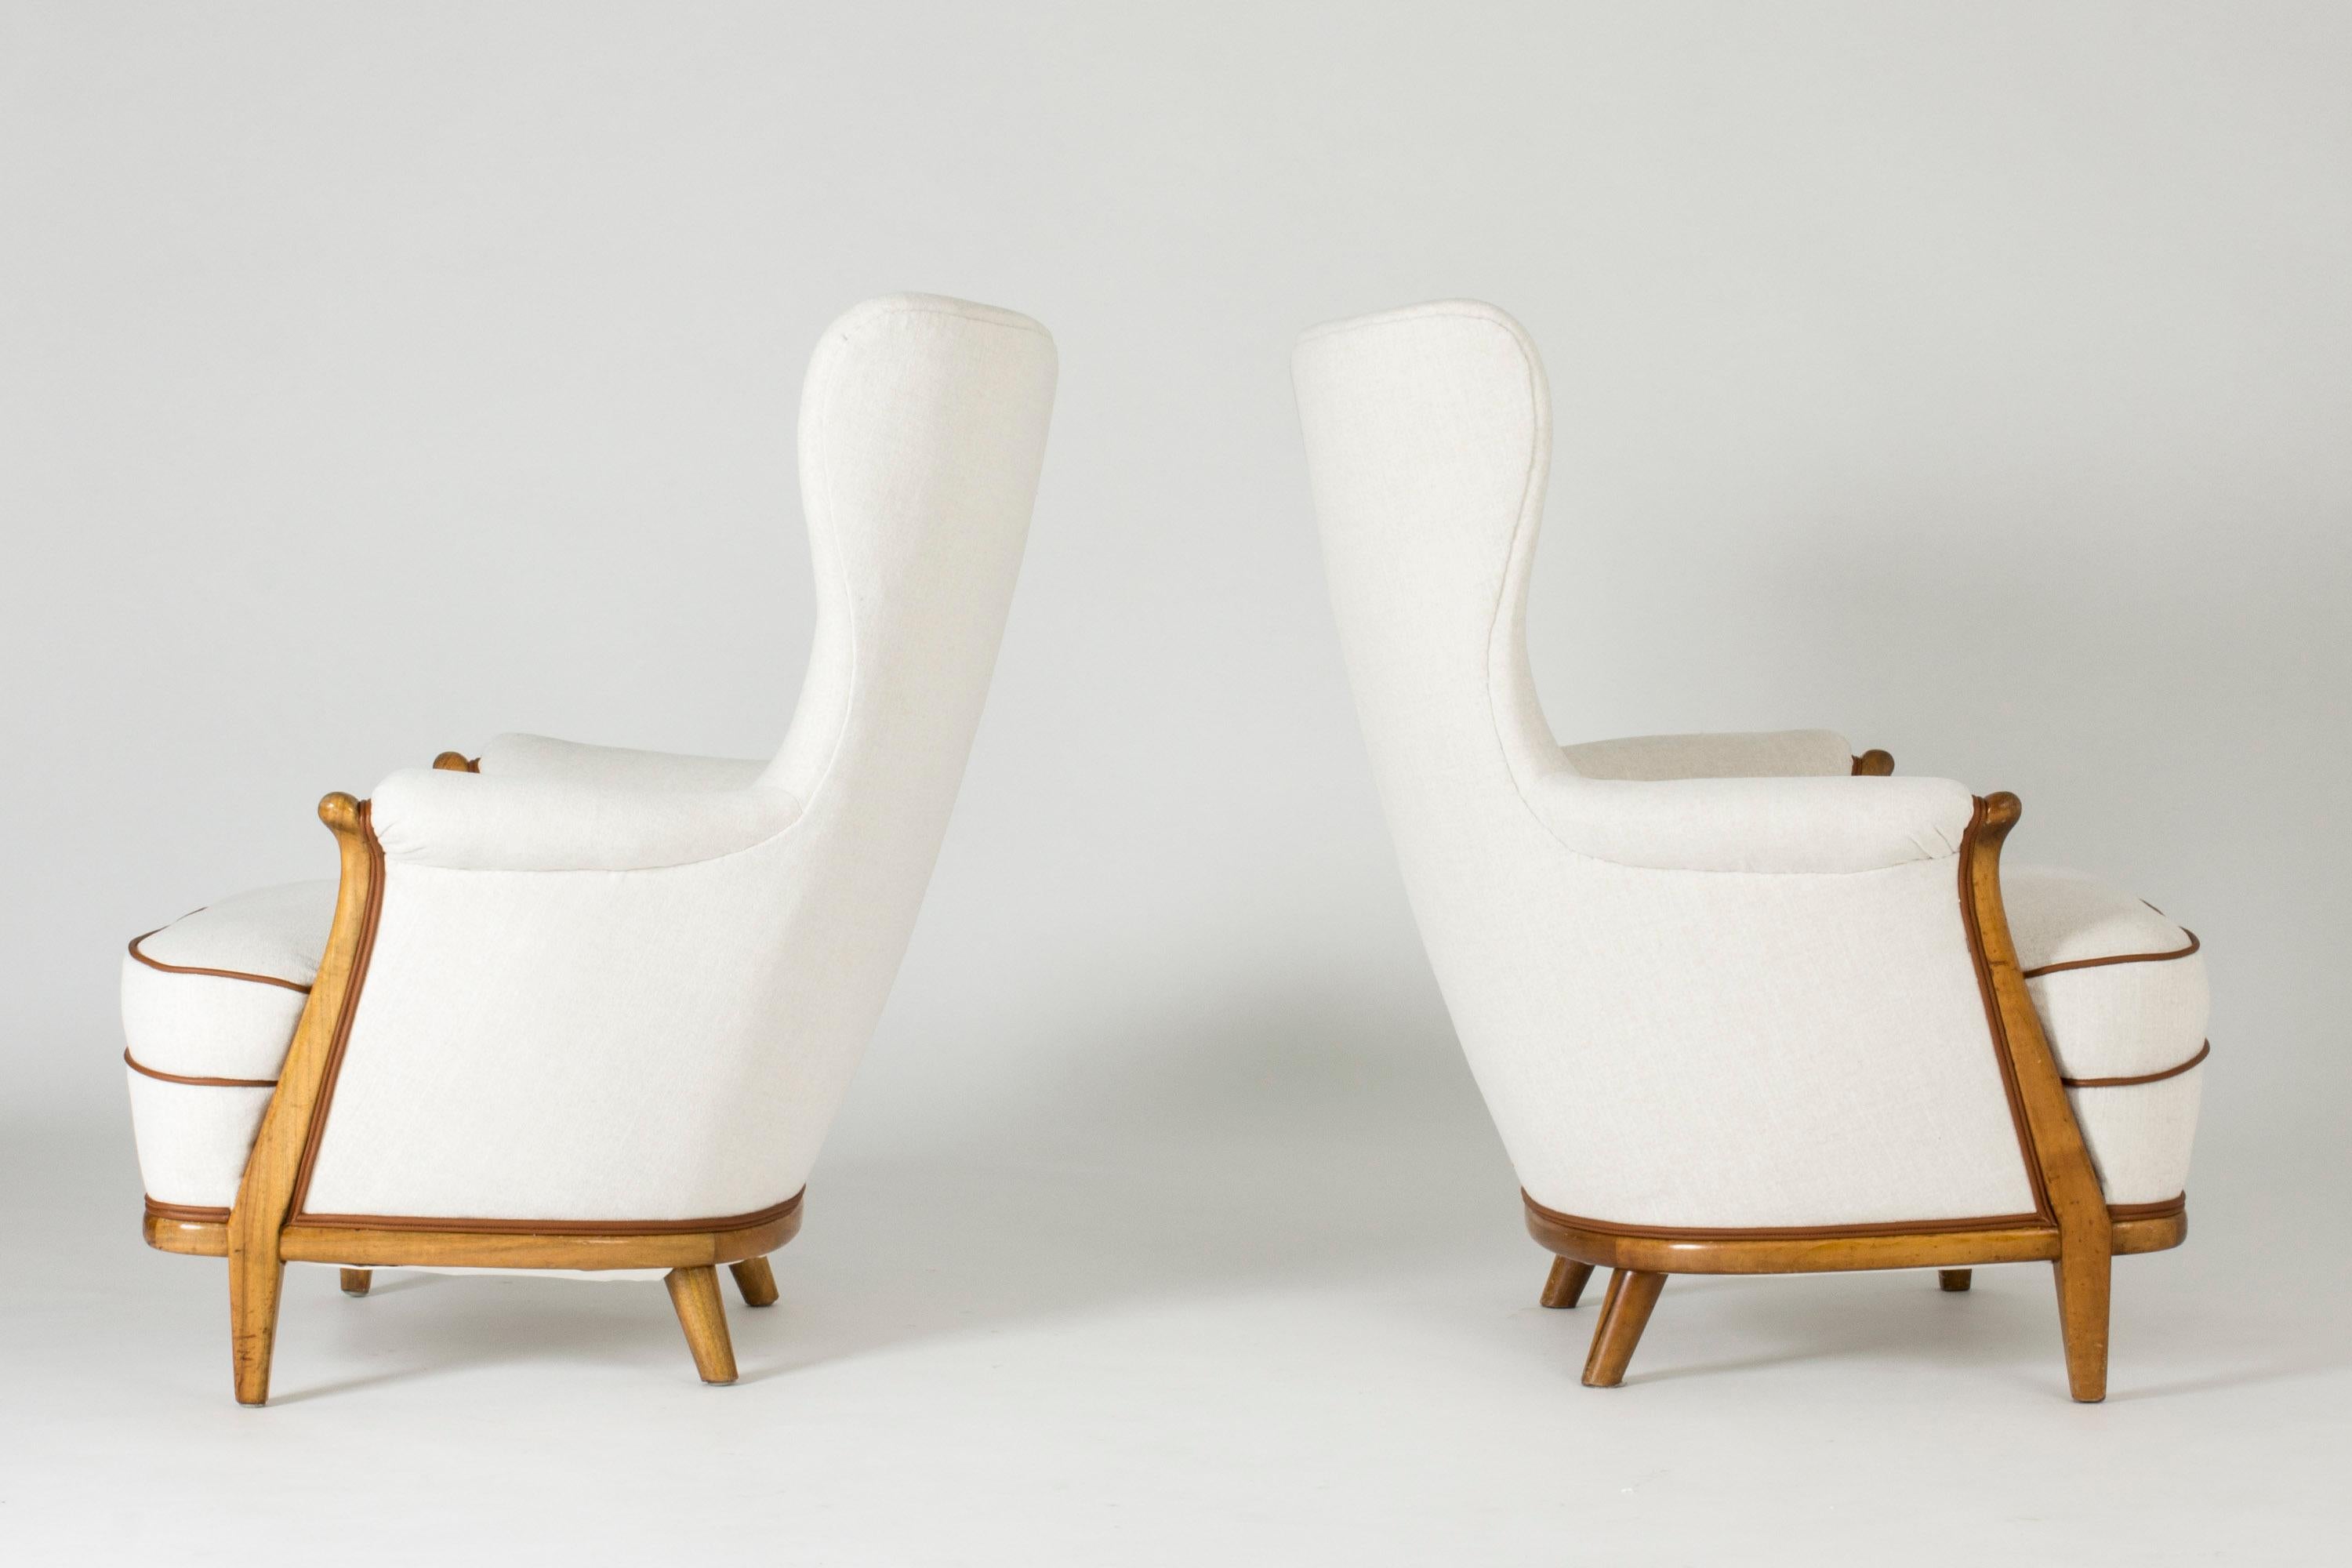 Pair of elegant lounge chairs by Gustaf Allert, made by master carpenter in 1939. Elegant broad backs with leather dressed buttons and walnut lining the base and the fronts of the armrests. The chairs are upholstered with double rows of leather